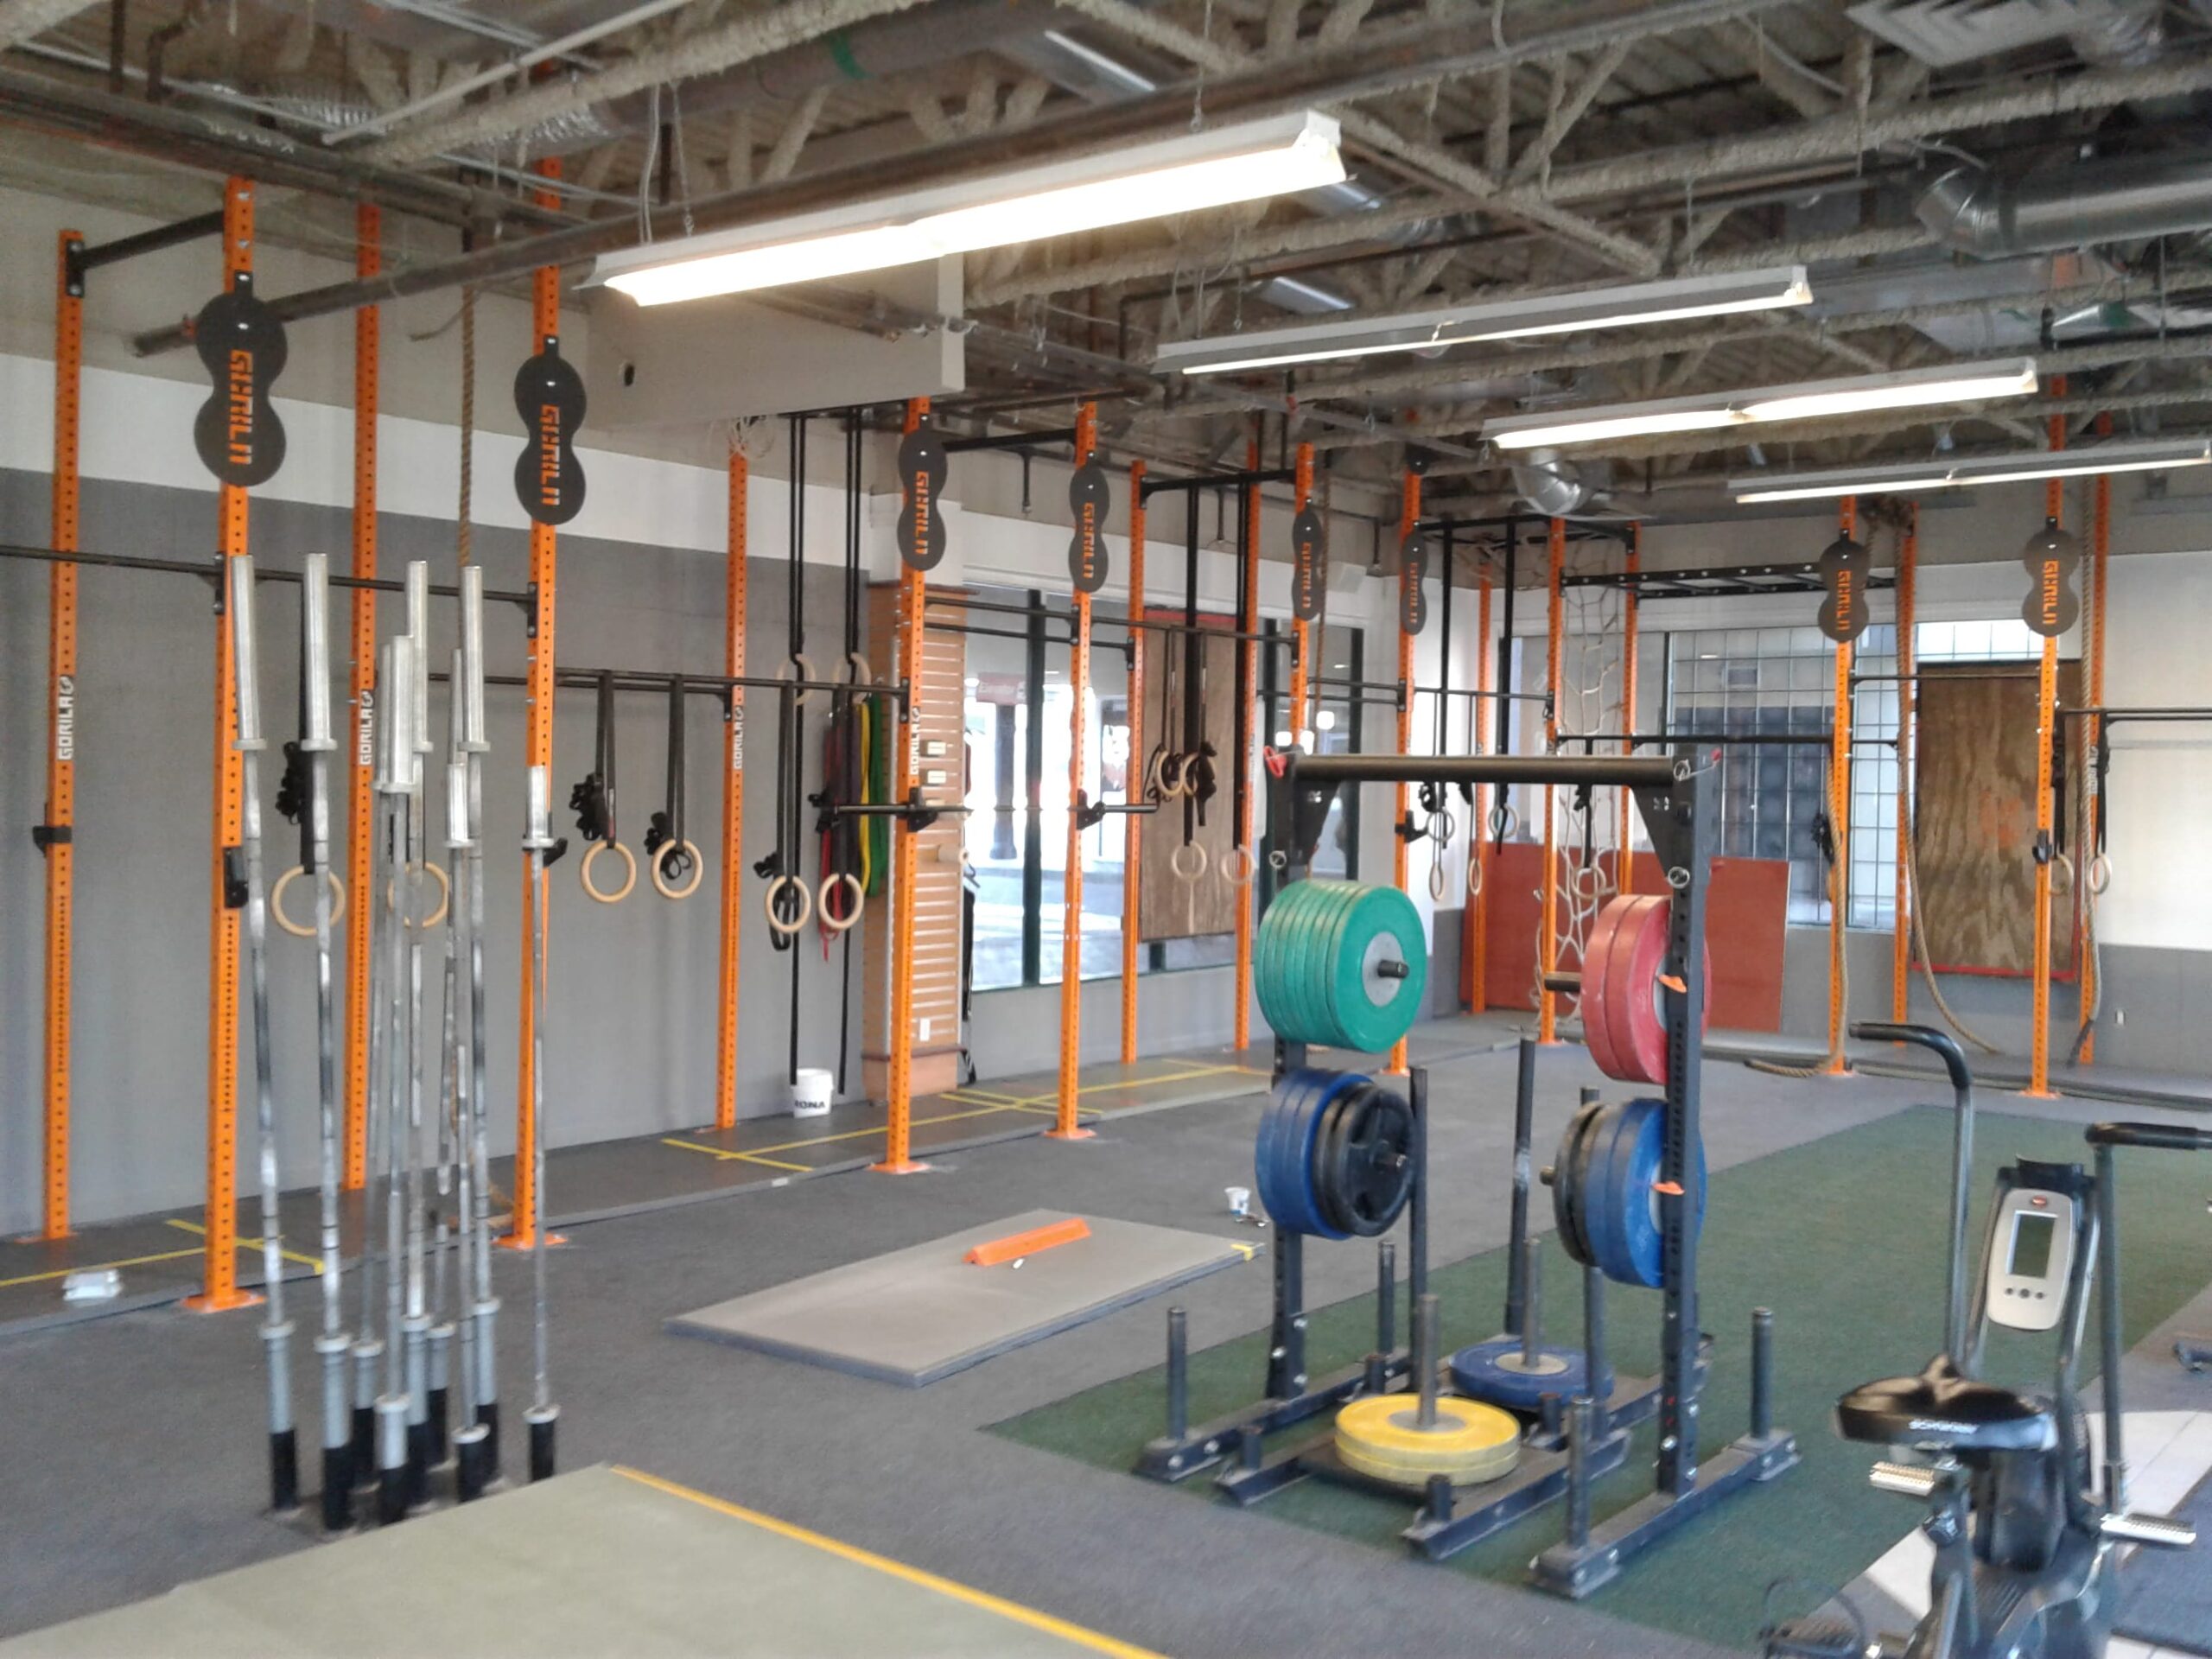 Crossfit Empower , Vancouver - Metagenics Fitness Inc. Vancouver